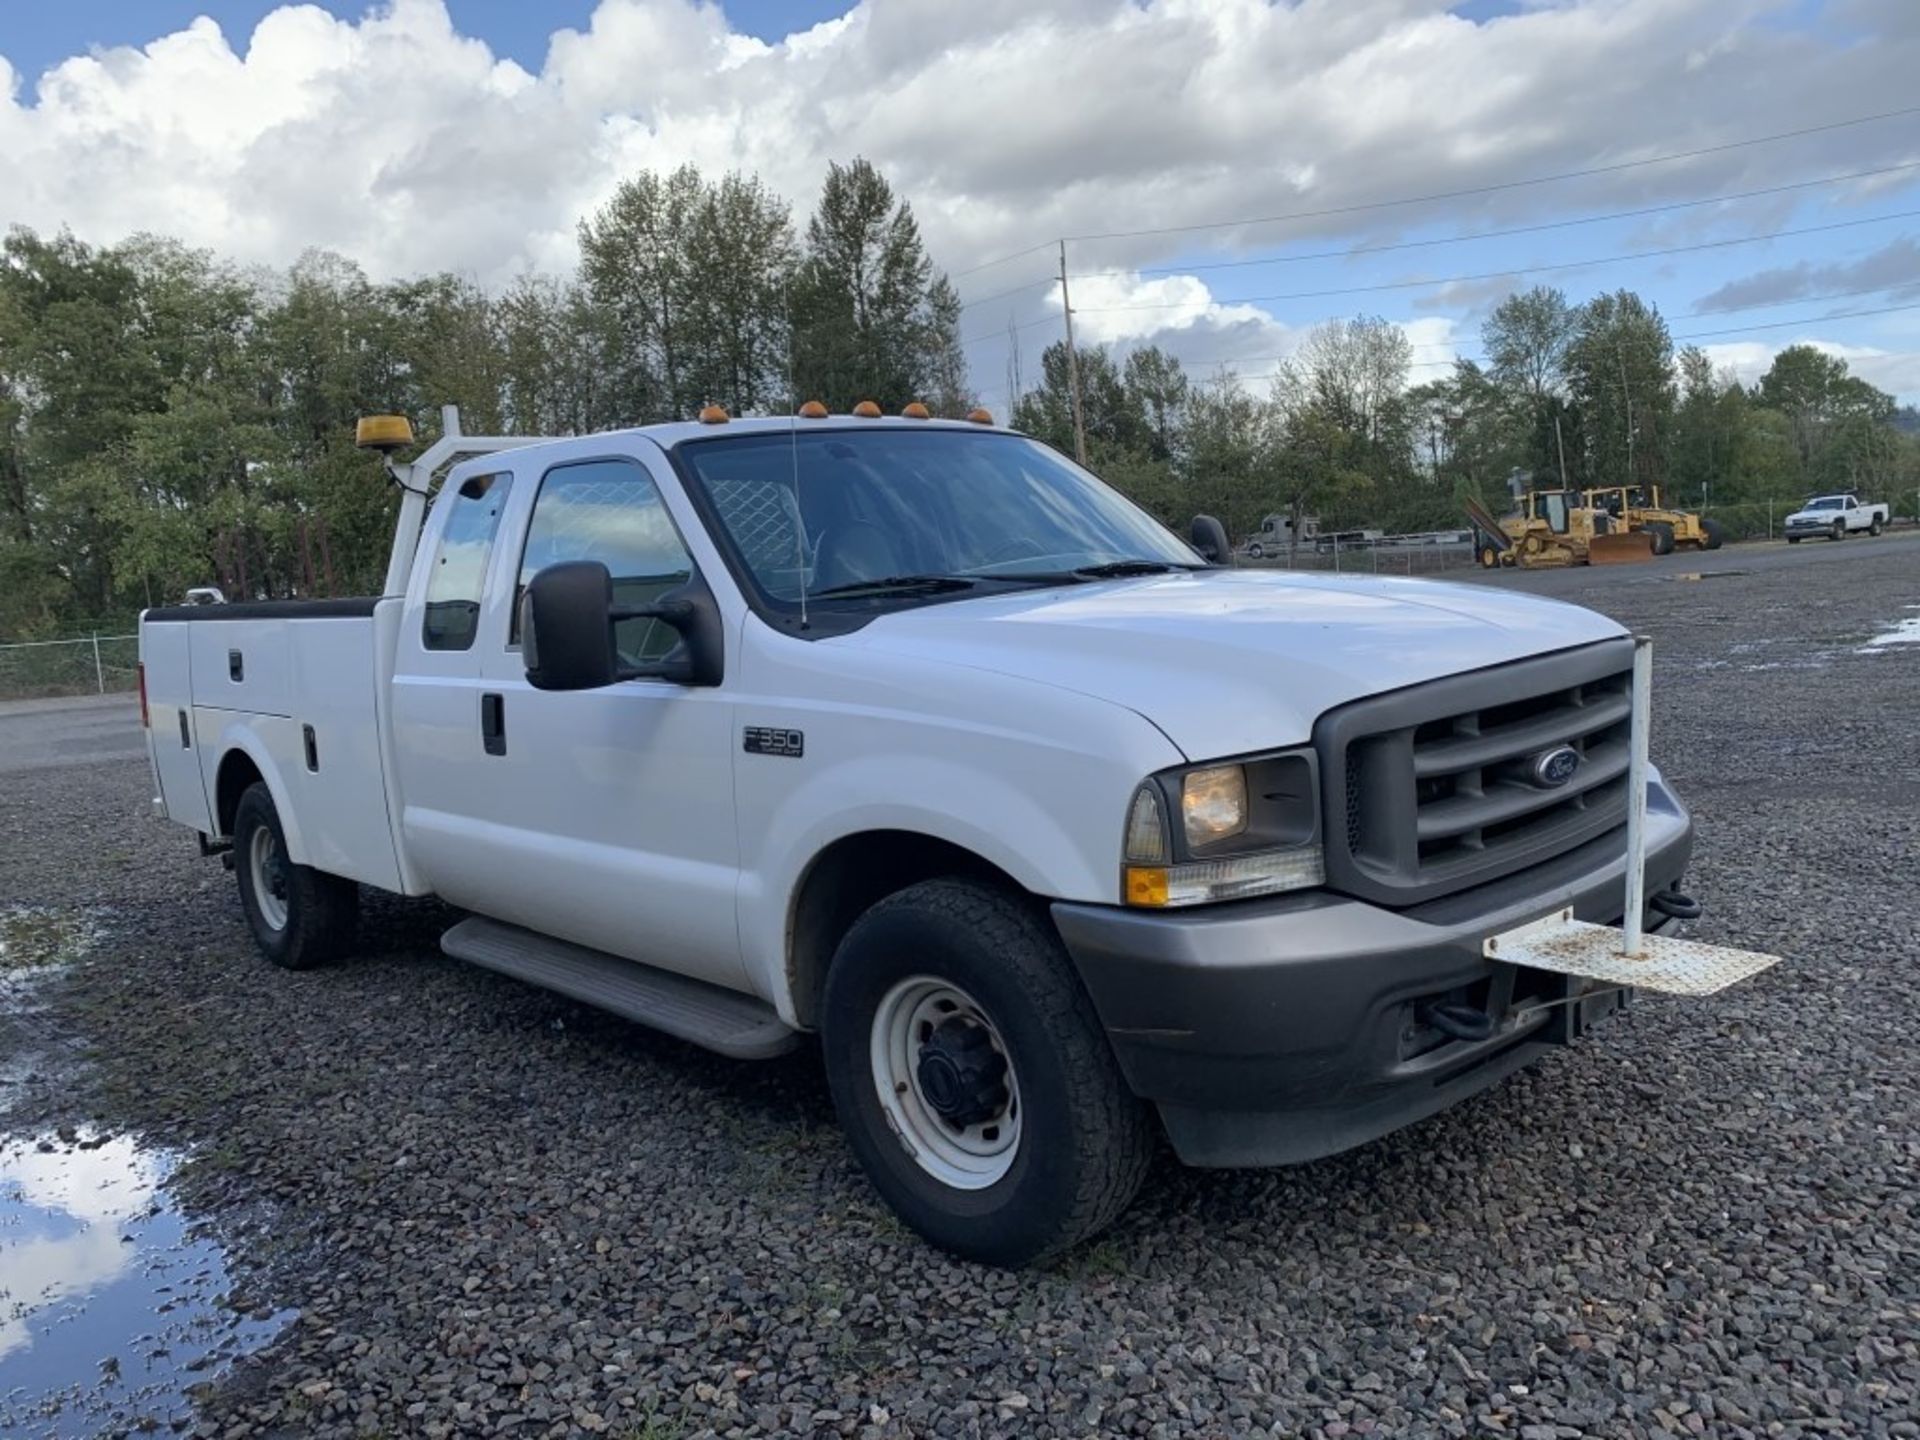 2004 Ford F350 XL SD Extra Cab Utility Truck - Image 2 of 21